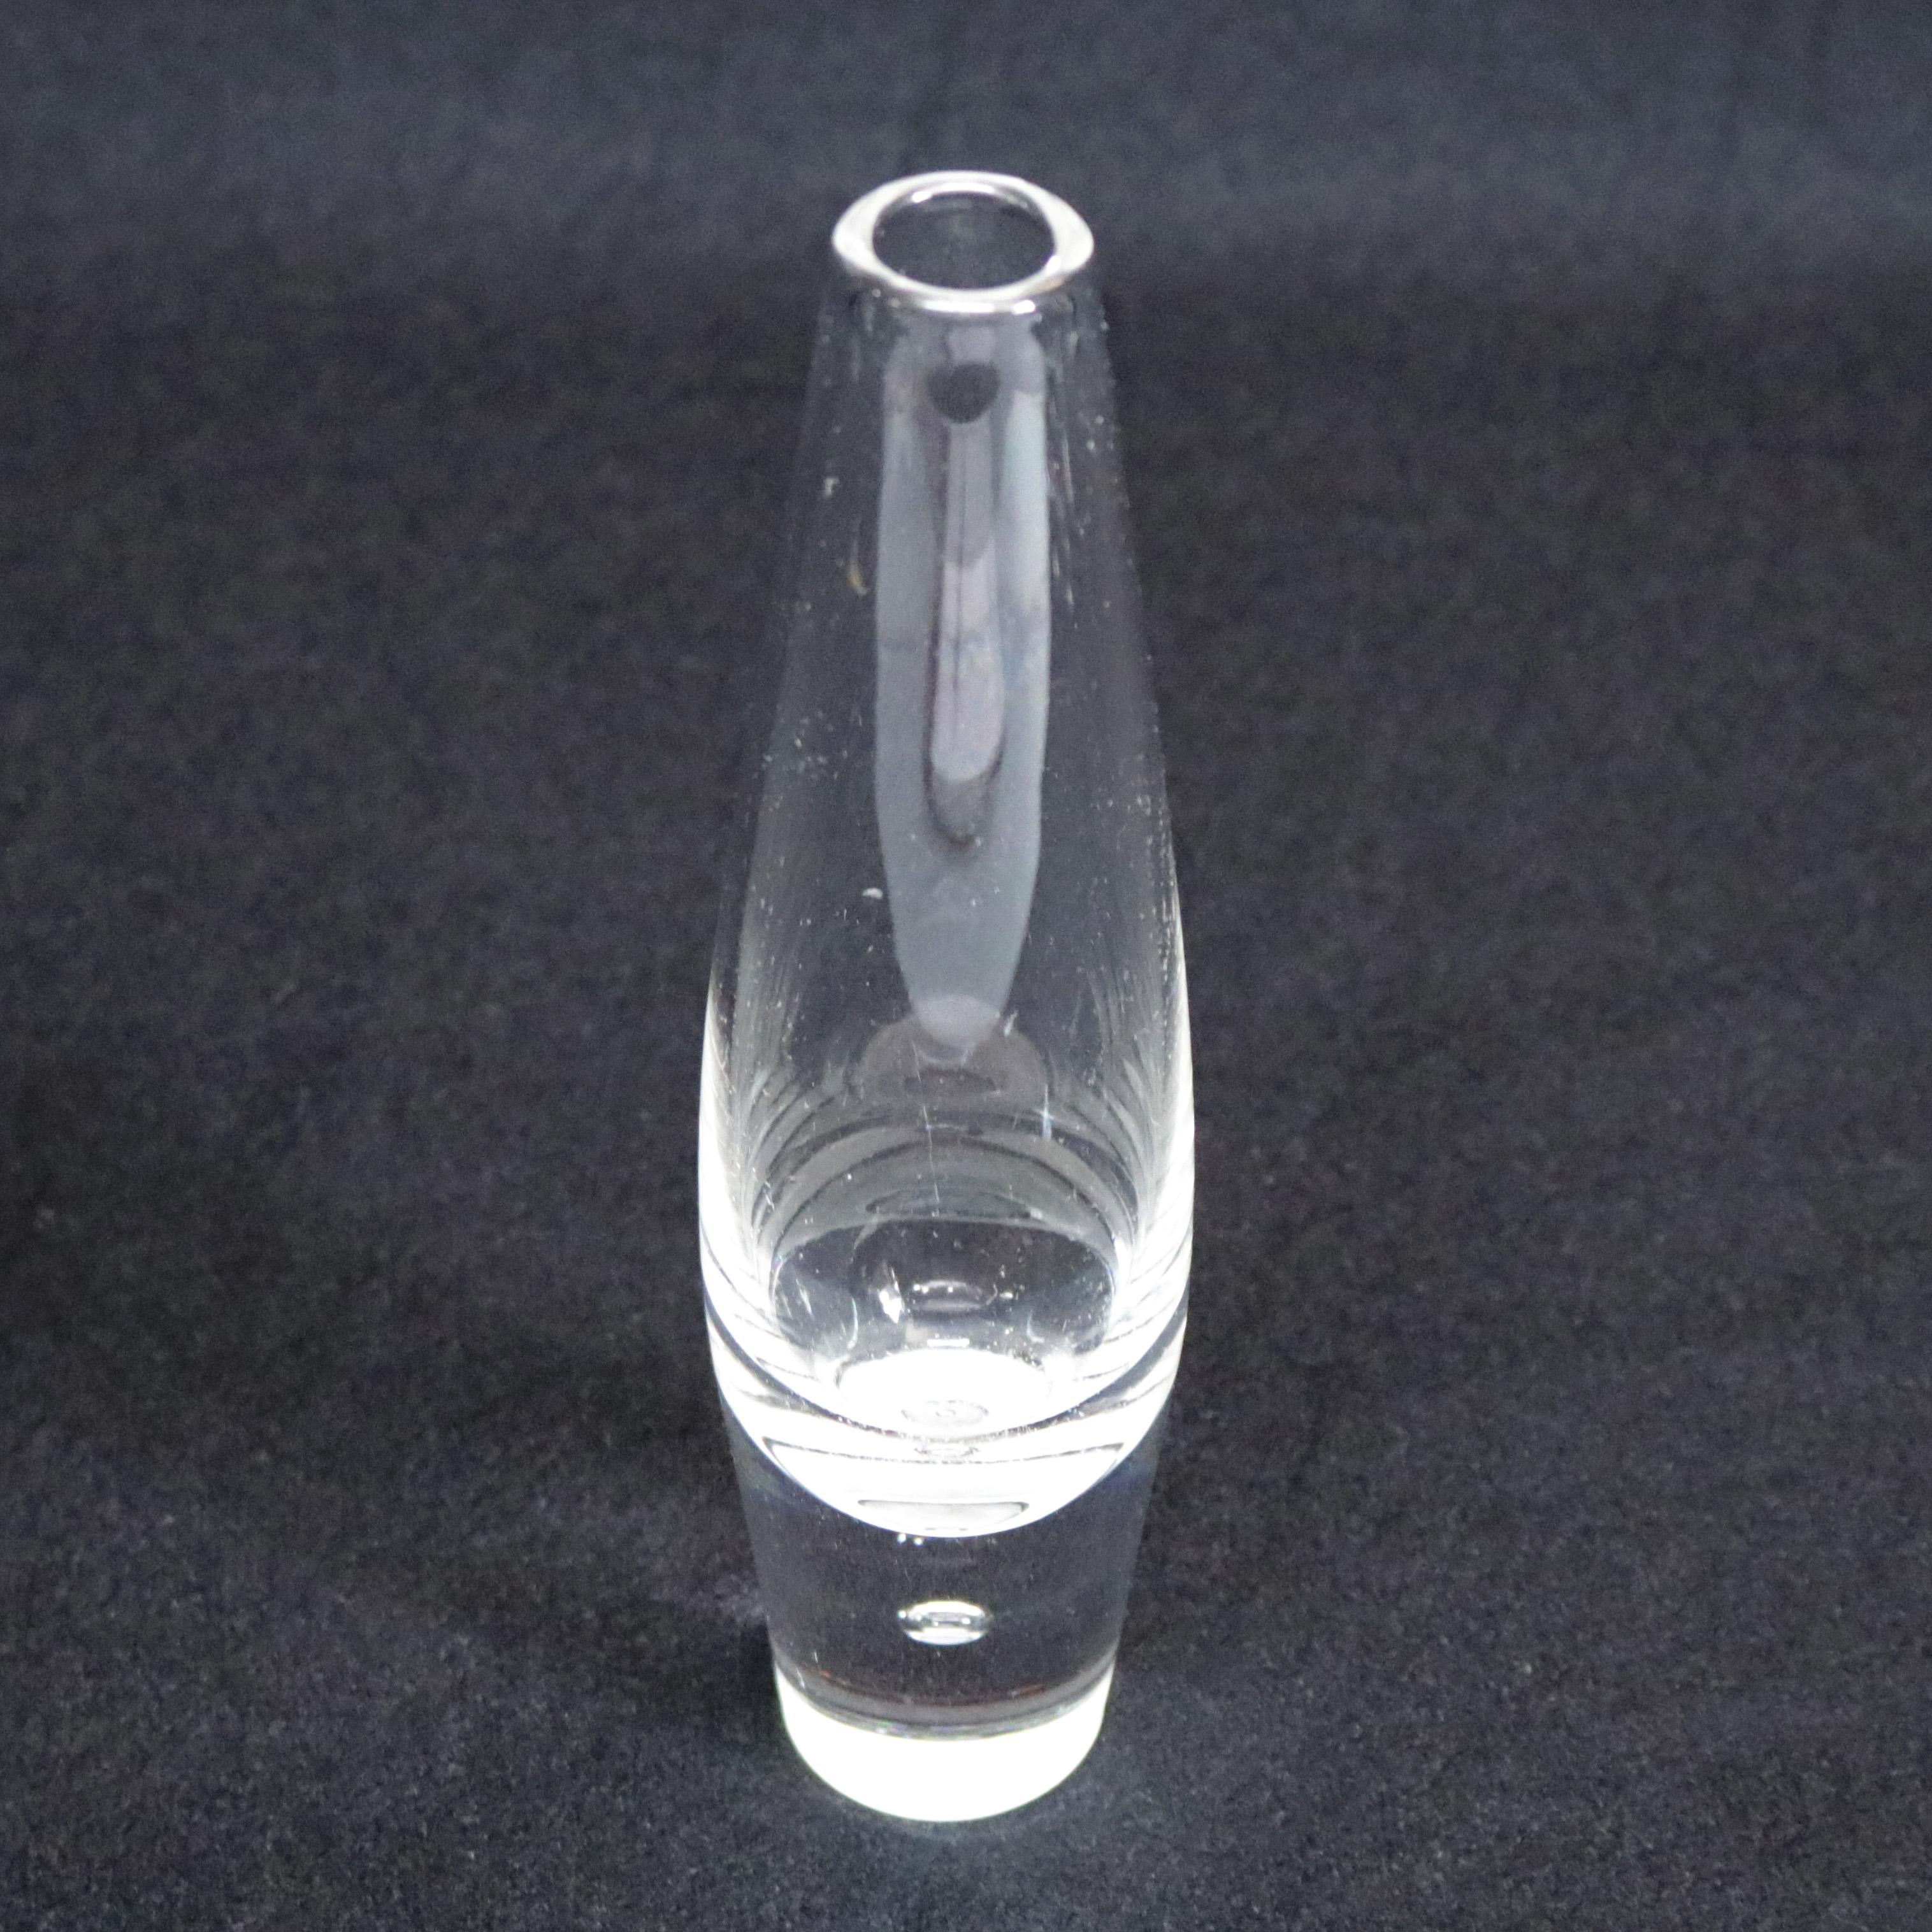 Midcentury Modernist Steuben mouth blown Teardrop Bud Vase features colorless art glass with single suspended air bubble in base designed by David Hills 1949 for Corning Museum of Glass, New York, NY, signed on base, 20th century.

Measures: 8.5